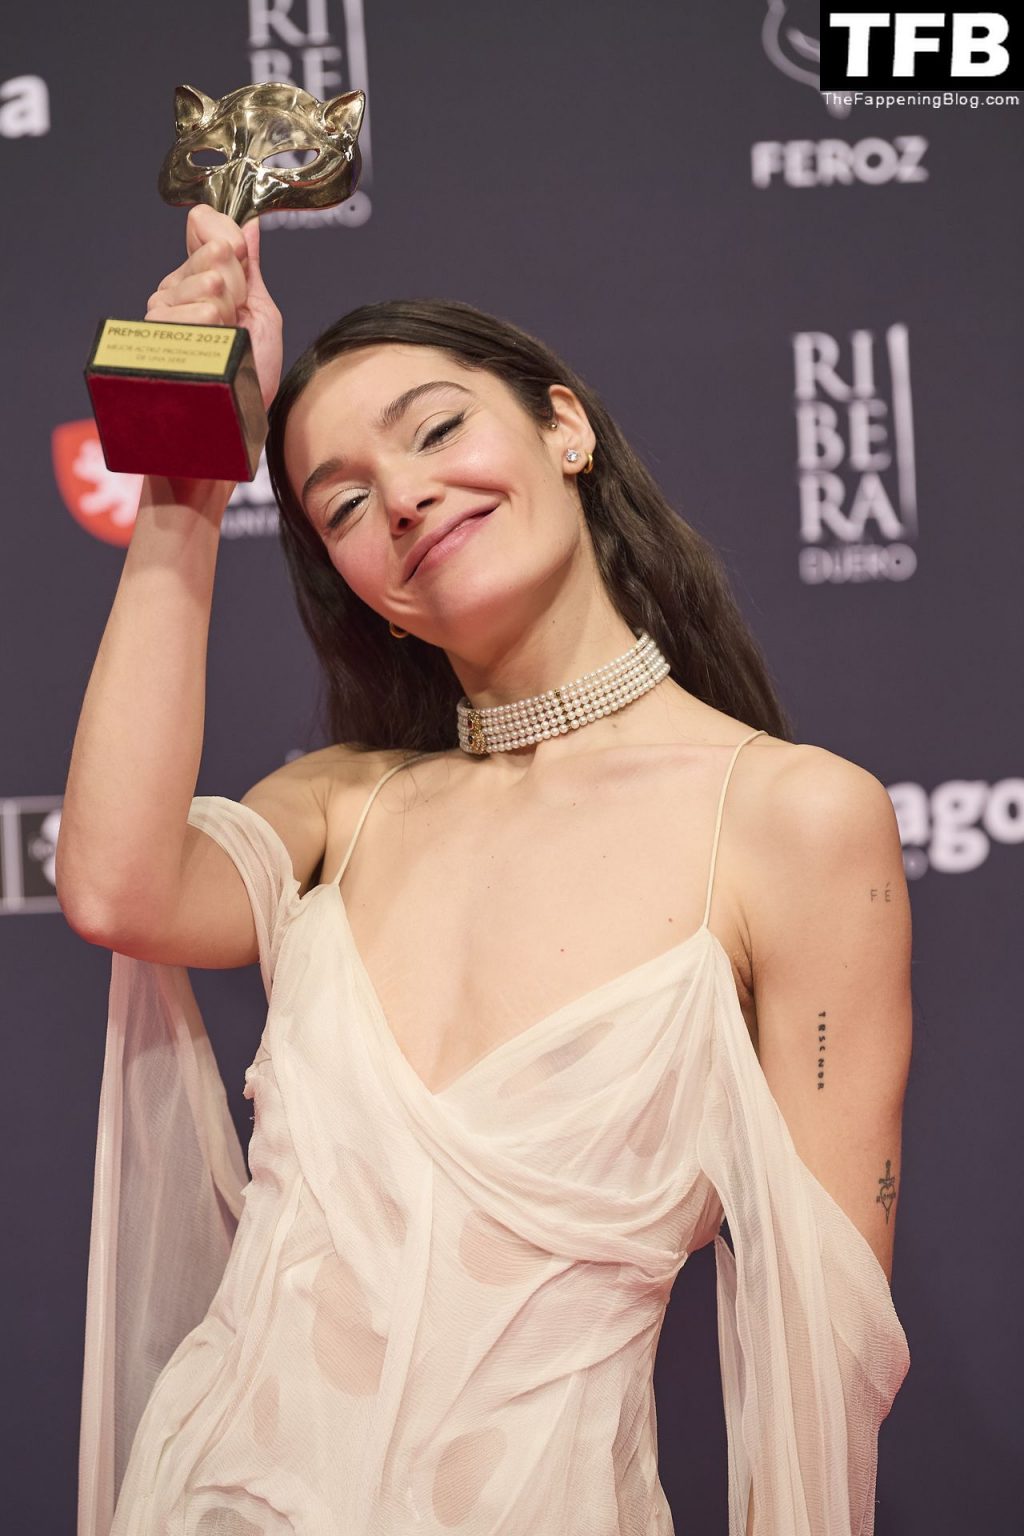 Ana Rujas Flashes Her Nude Tit at the Feroz Award 2022 (36 Photos)